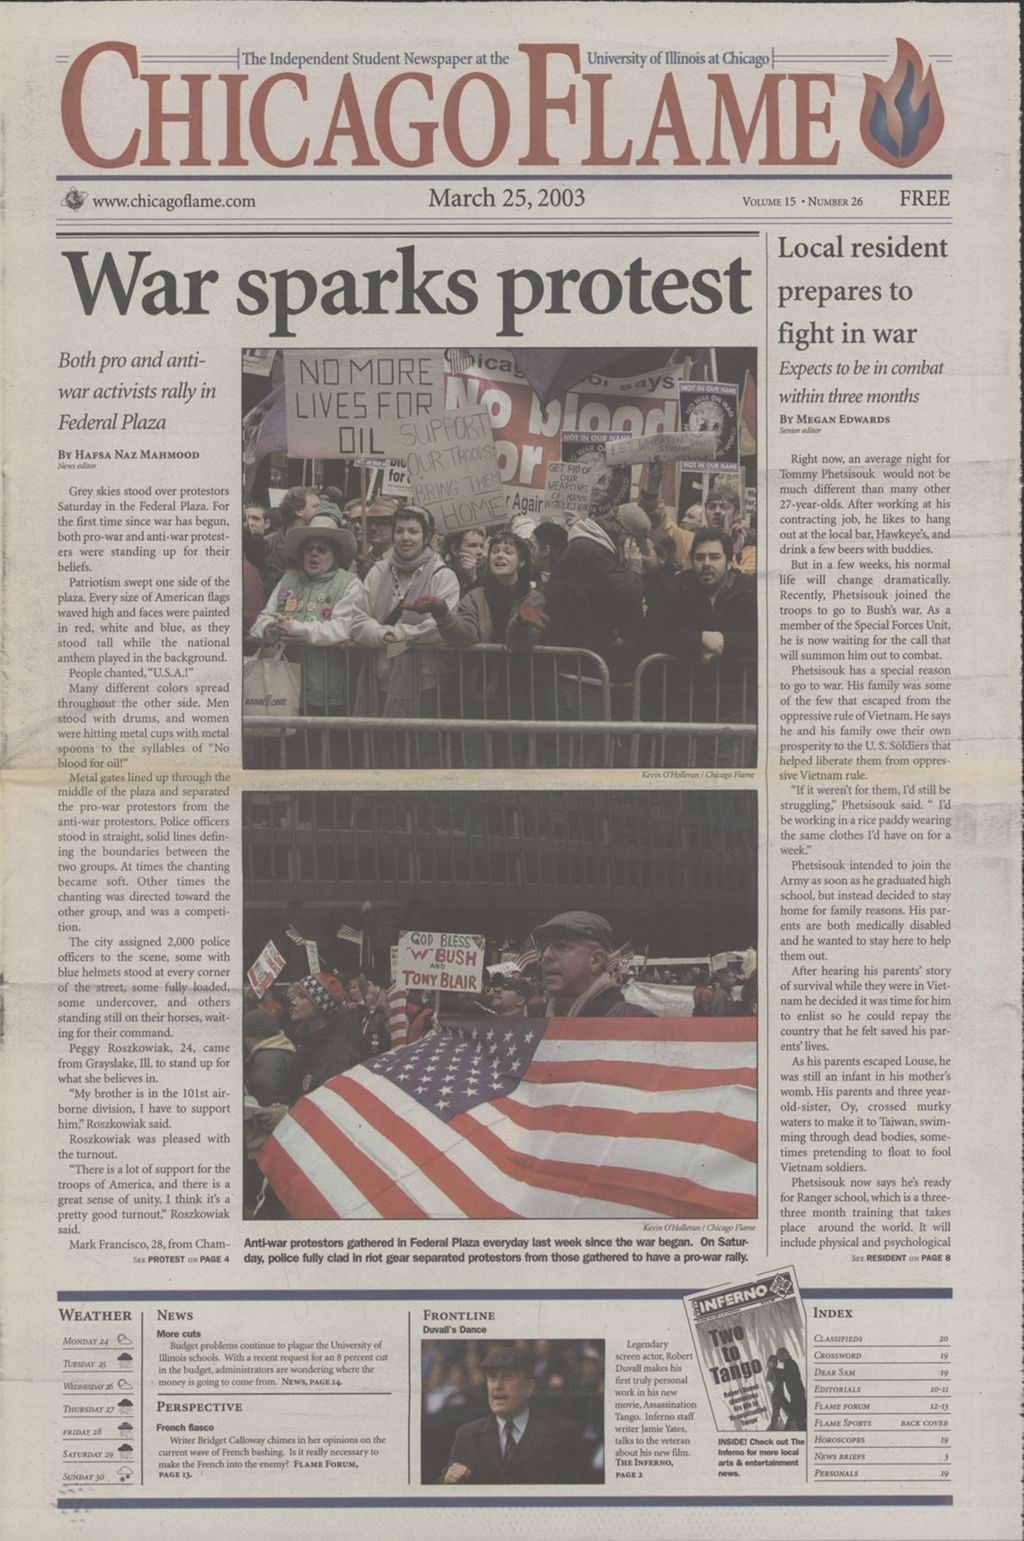 Chicago Flame (March 25, 2003)